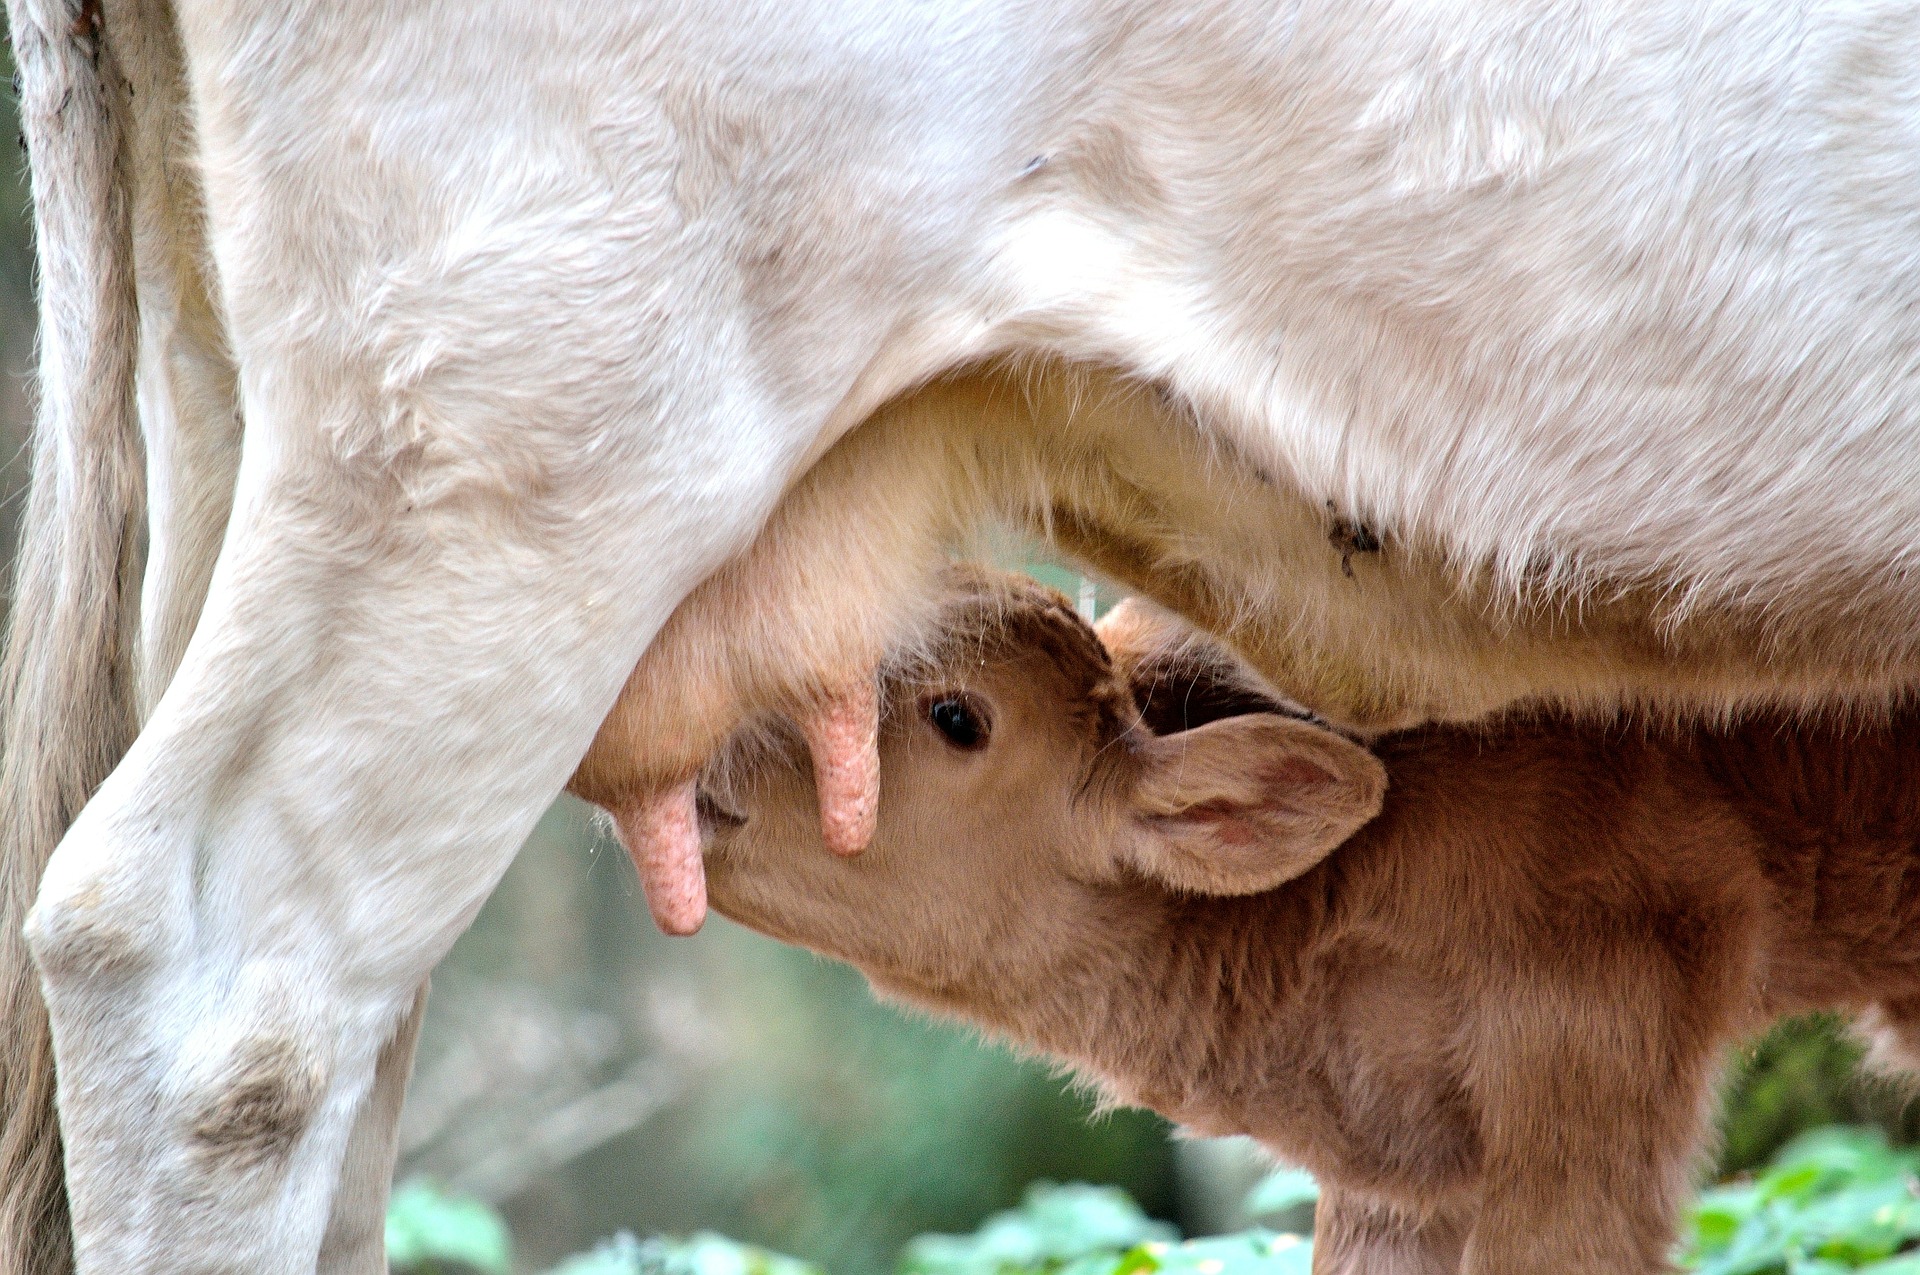 What are supernumerary teats in dairy calves?